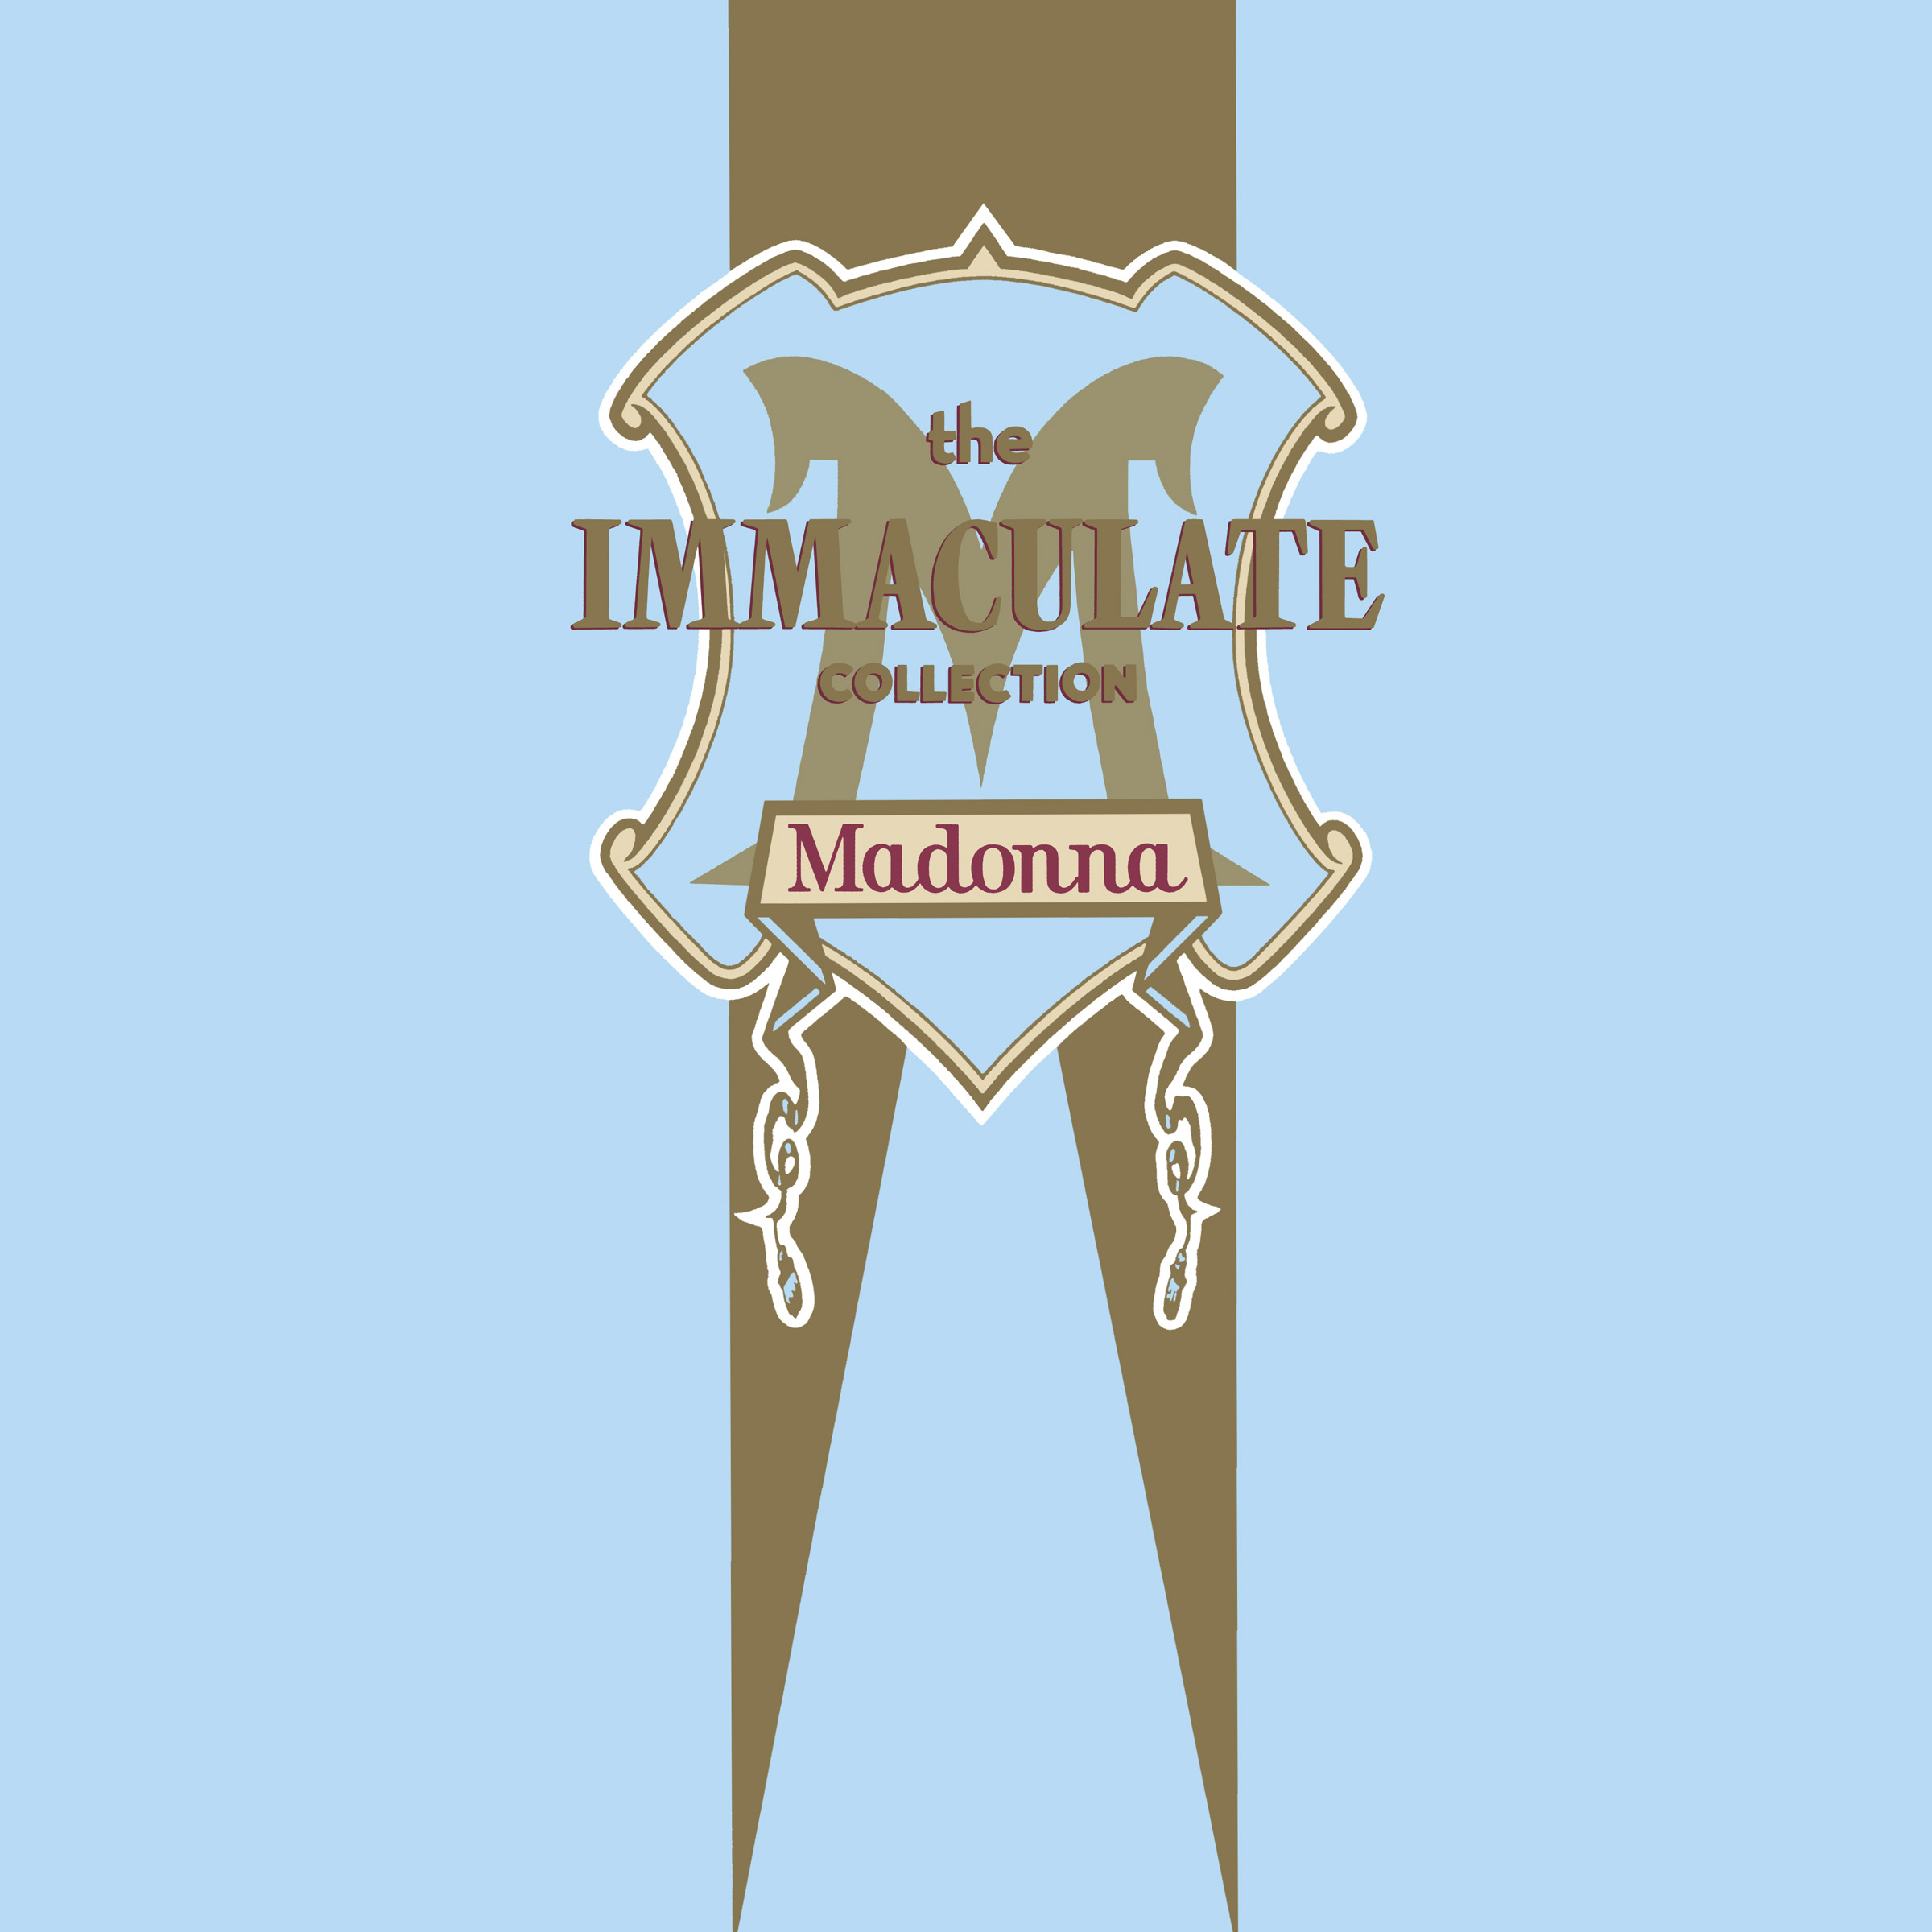 MADONNA_IMMACULATE%20COLLECTION.jpg